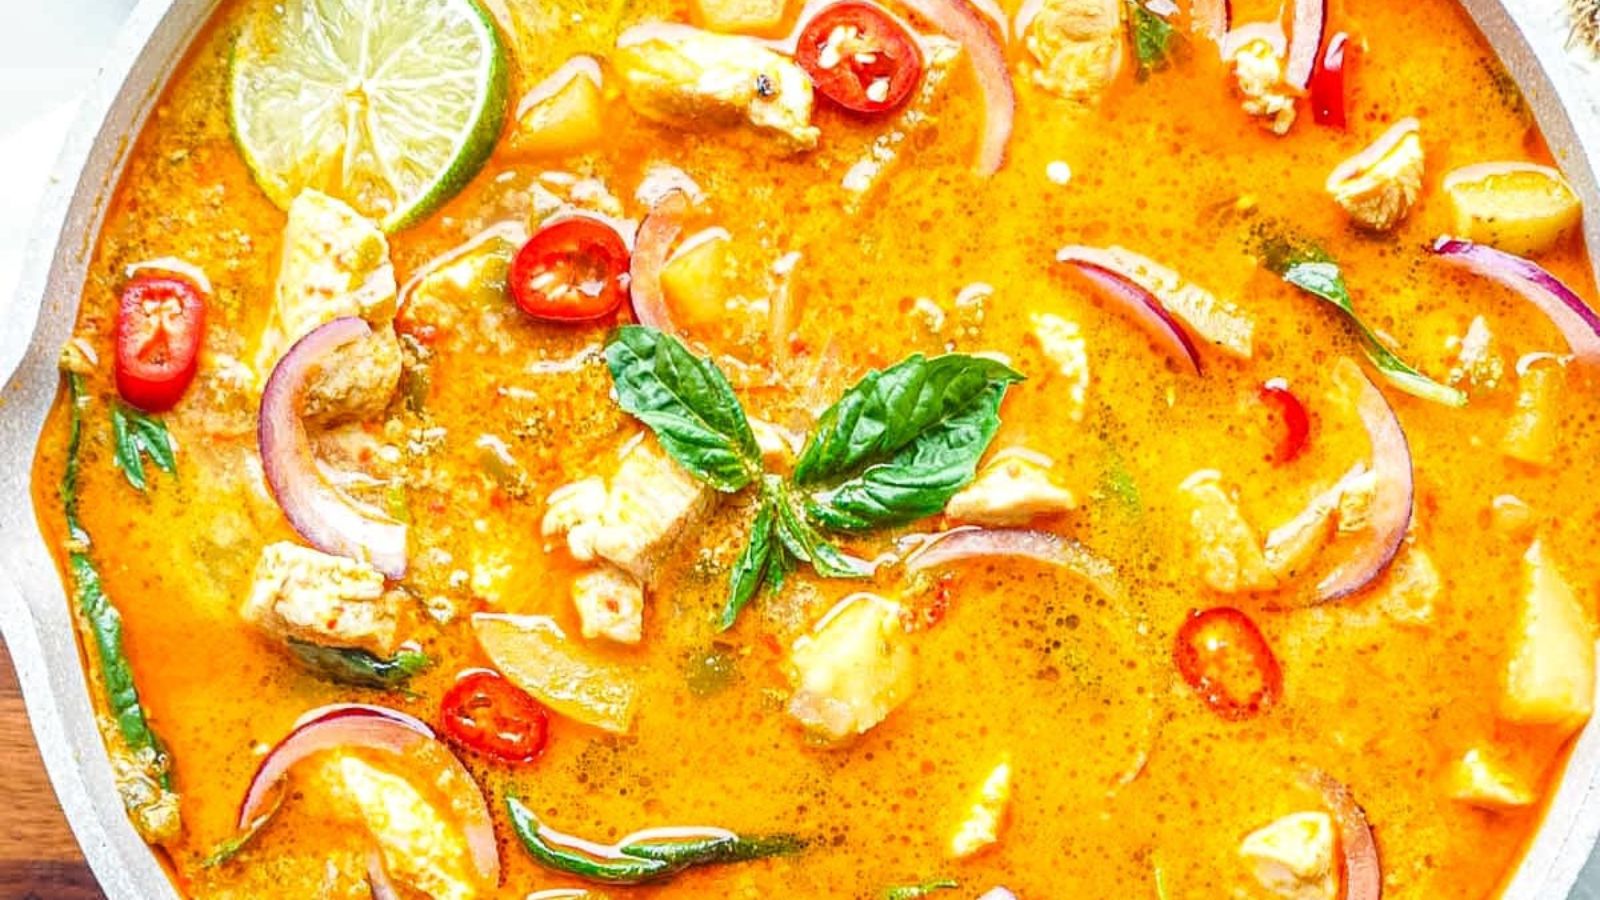 Fast and Nutritious: Whip Up These 20 Healthy Curry Recipes in Less than 45 Minutes